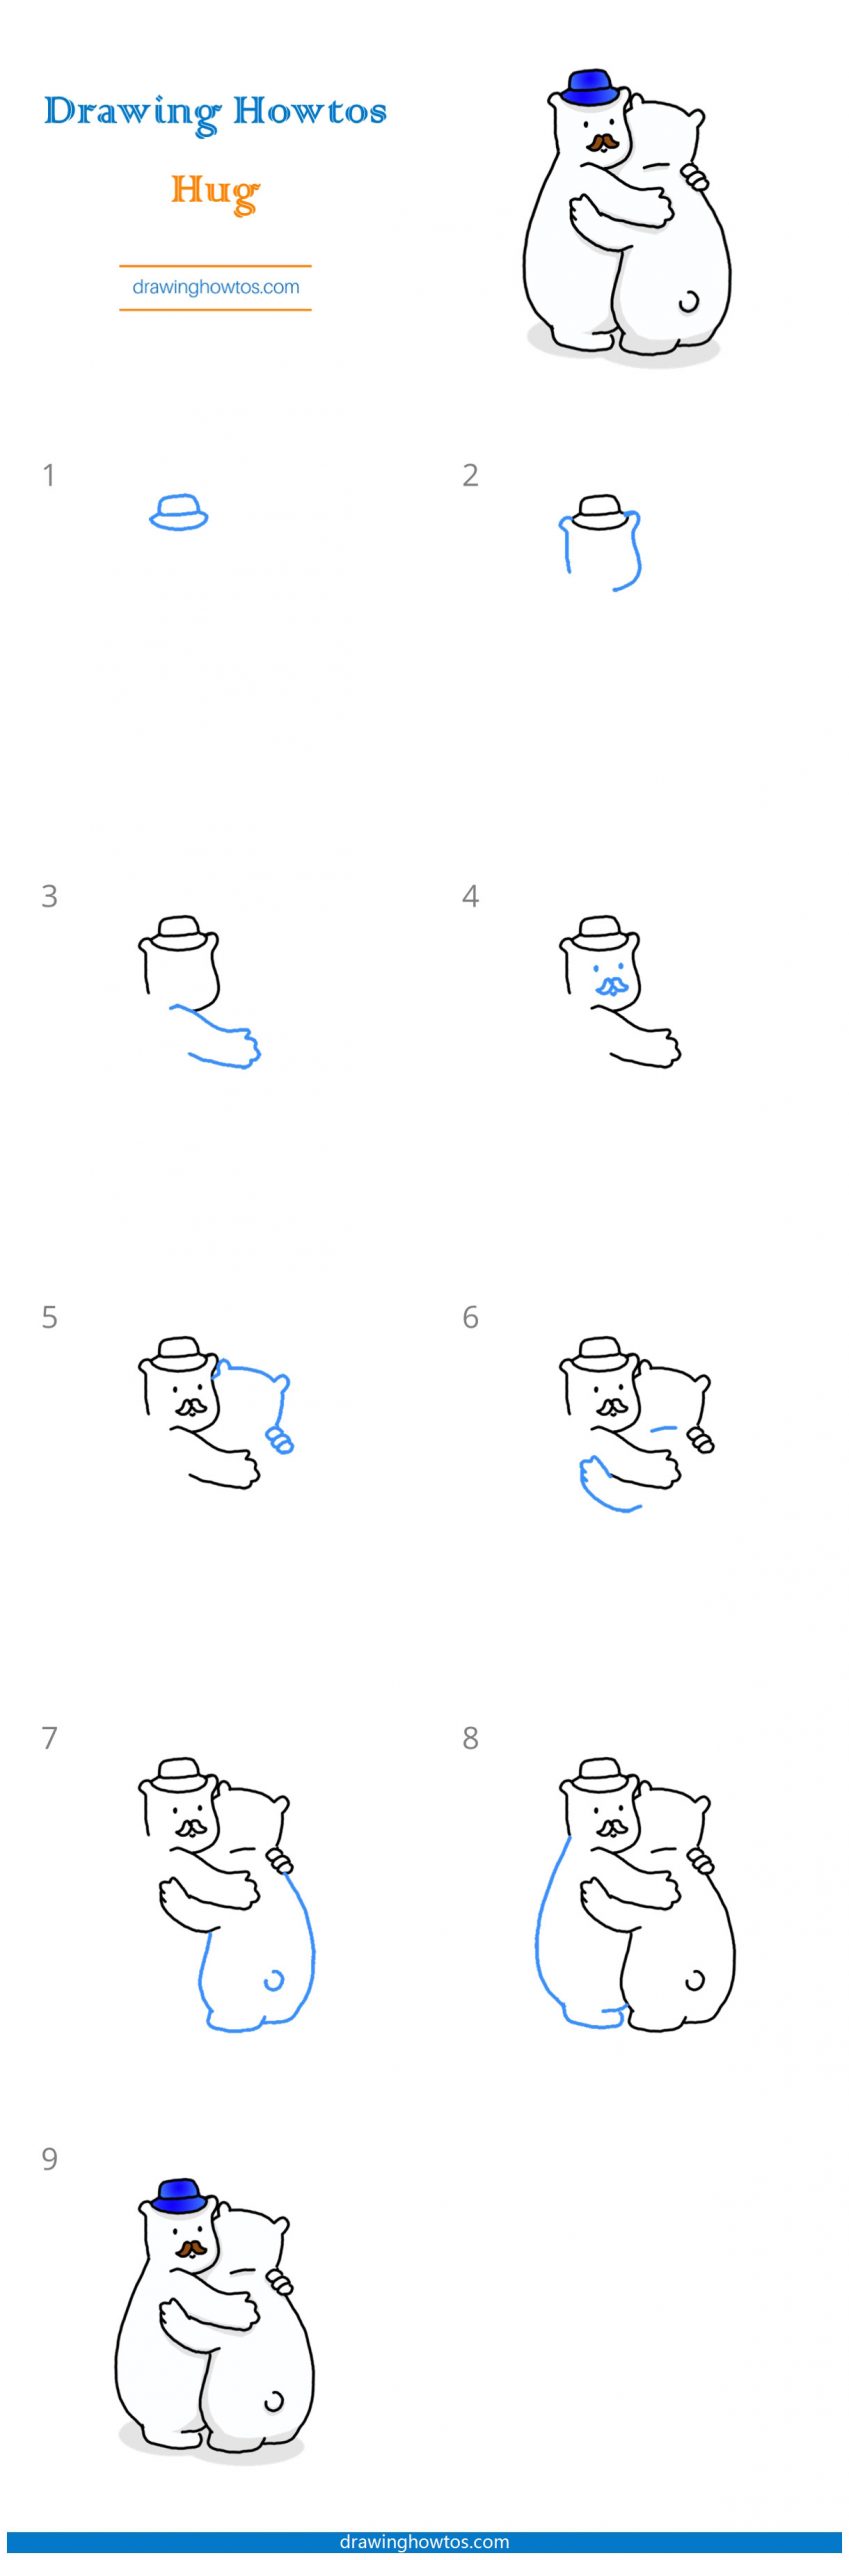 How to Draw a Hug Step by Step